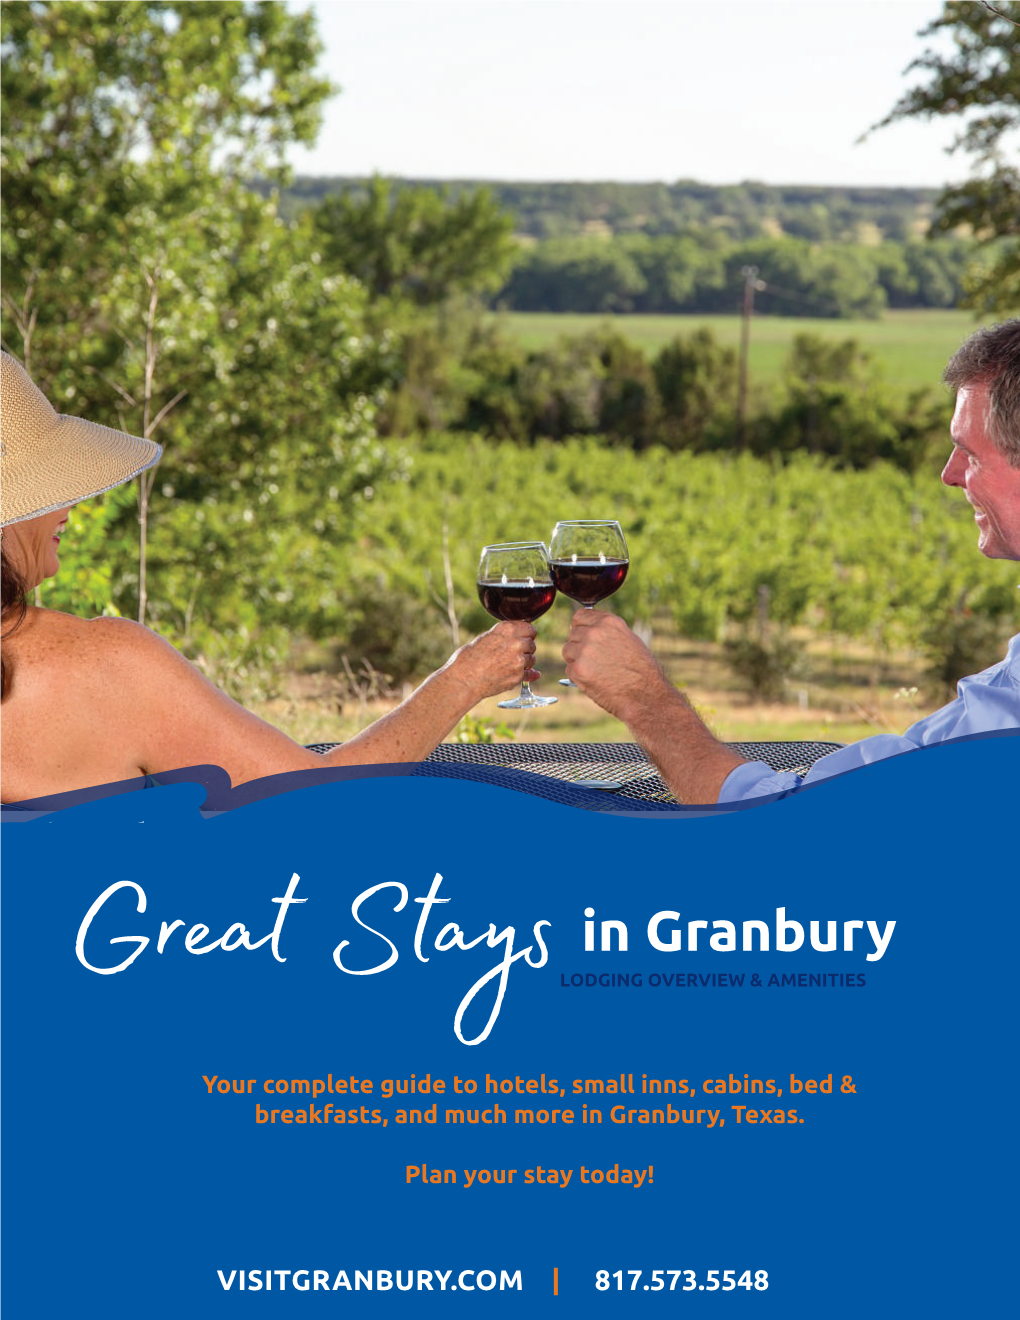 Great Stays in Granbury Updated August 2018